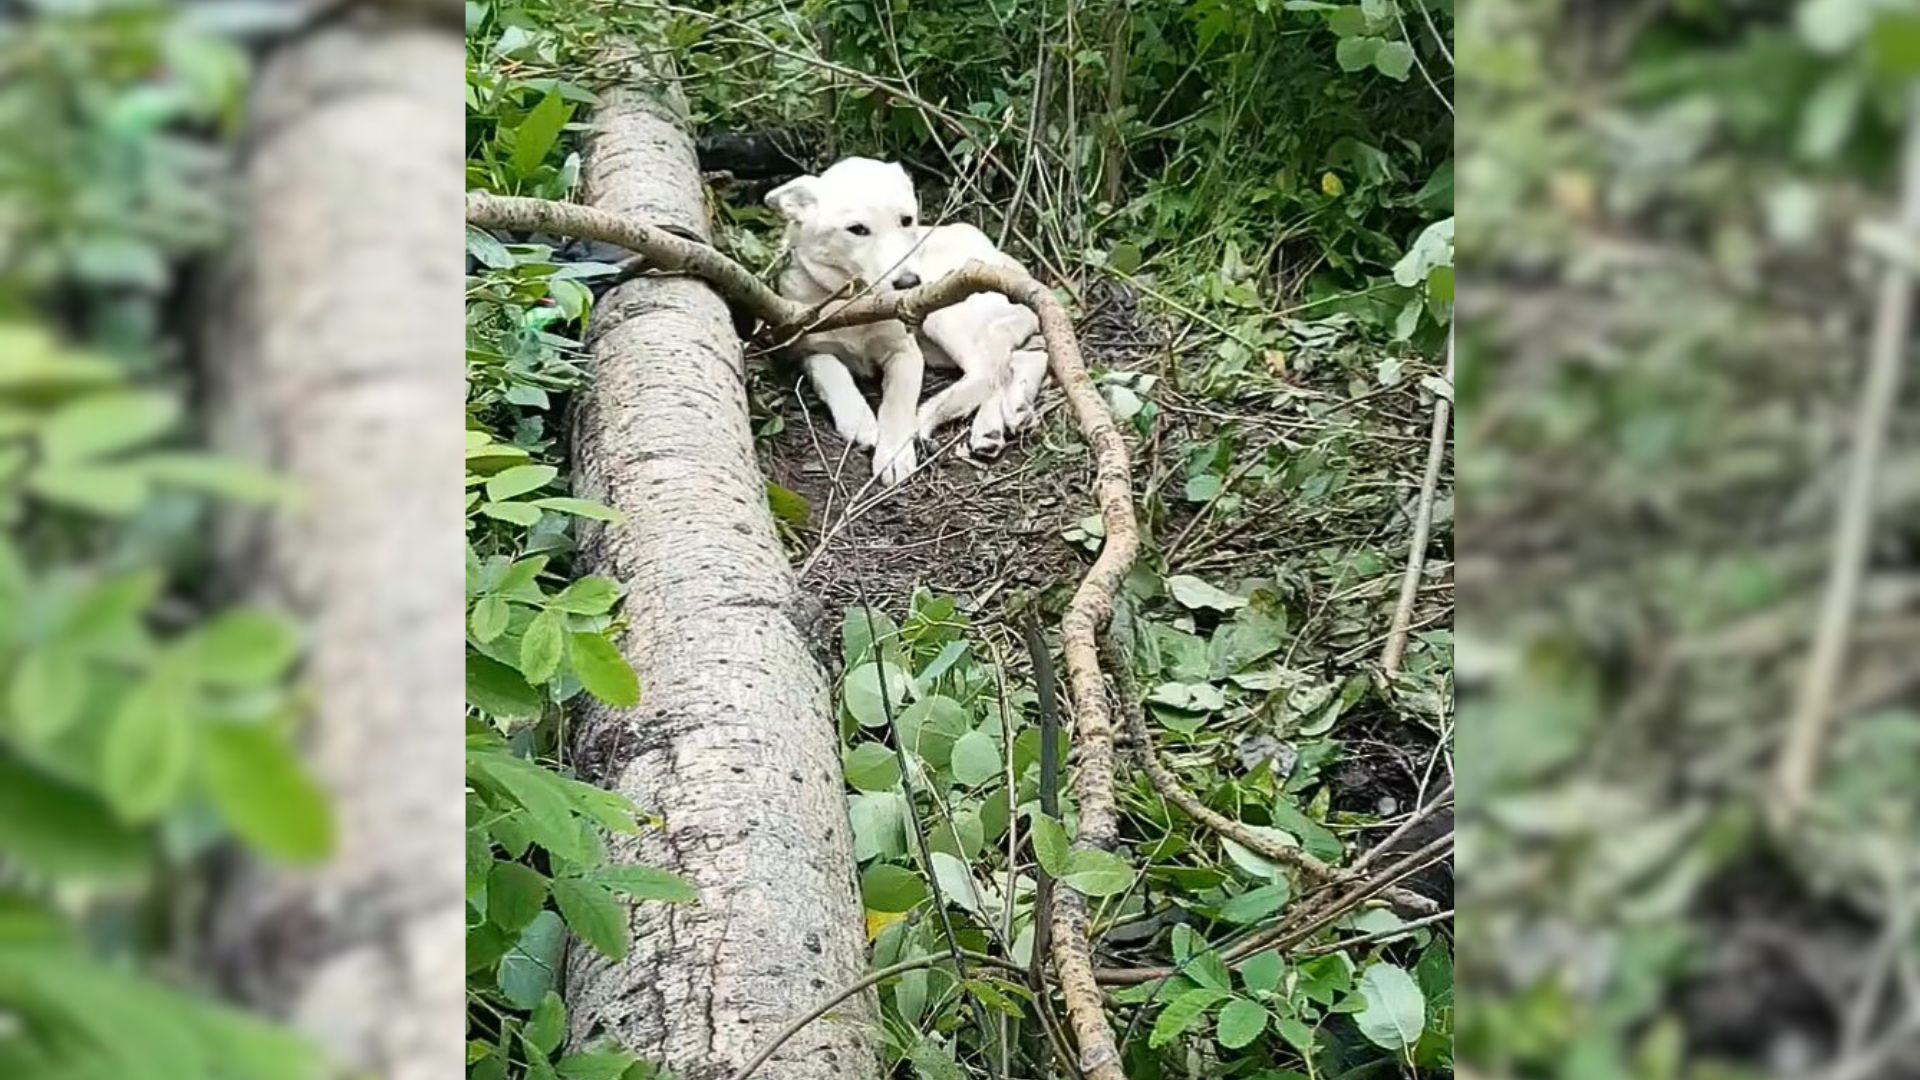 Man Noticed A Scared And Injured Dog In The Woods And Then Decides To Help Her